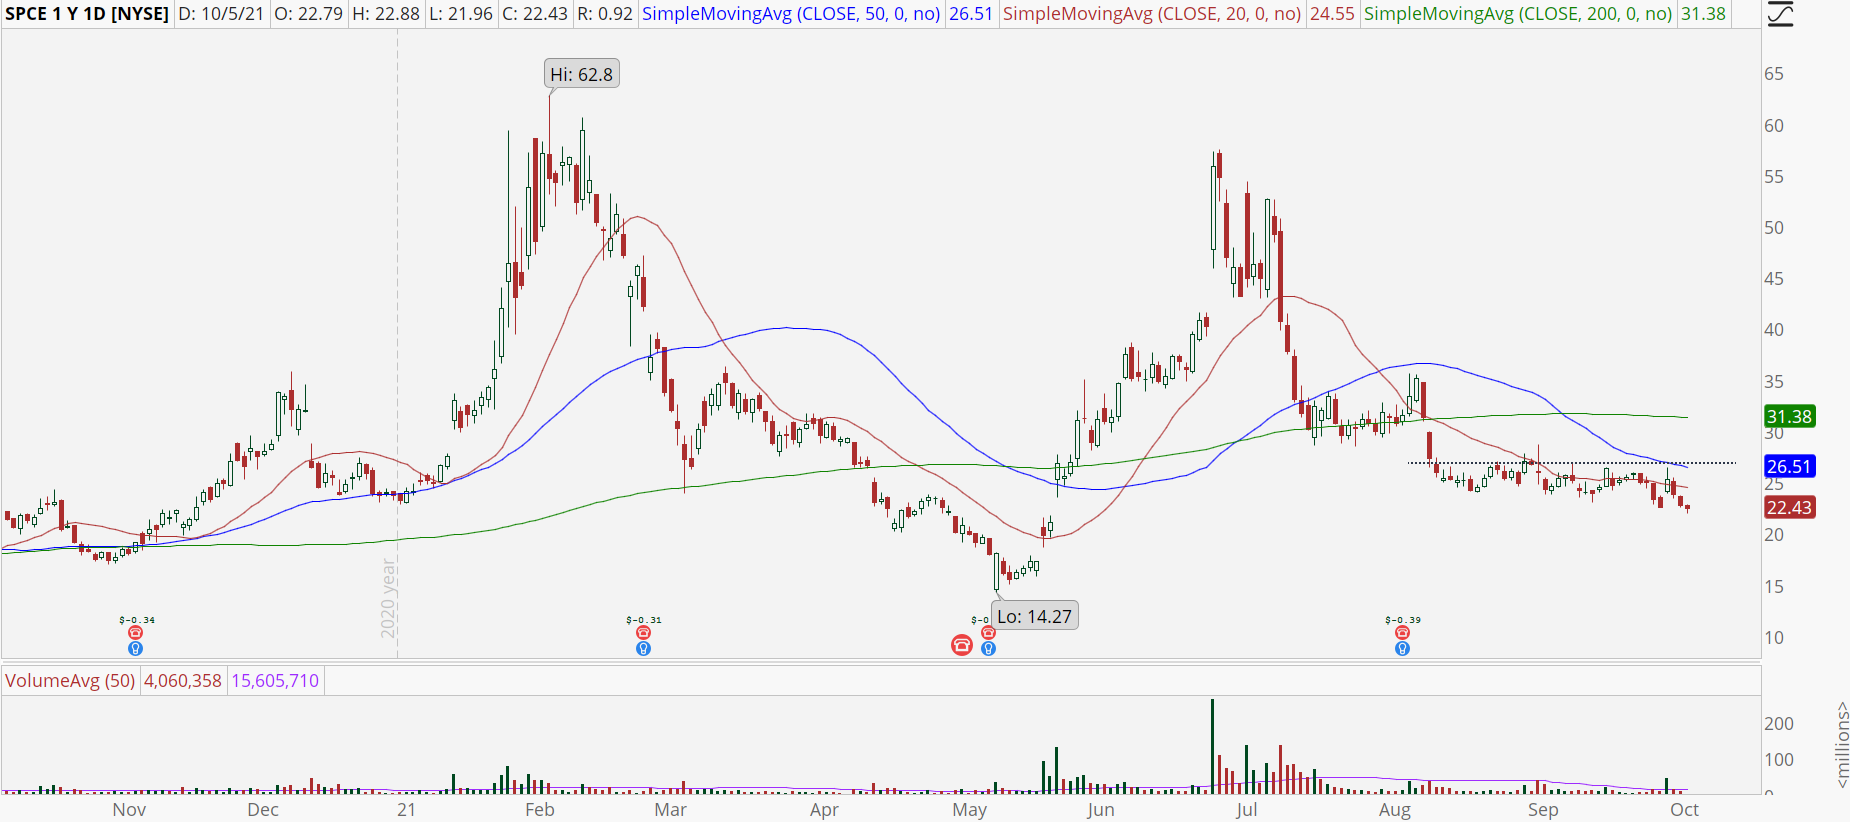 Virgin Galactic Holdings (SPCE) daily stock chart with downtrend.